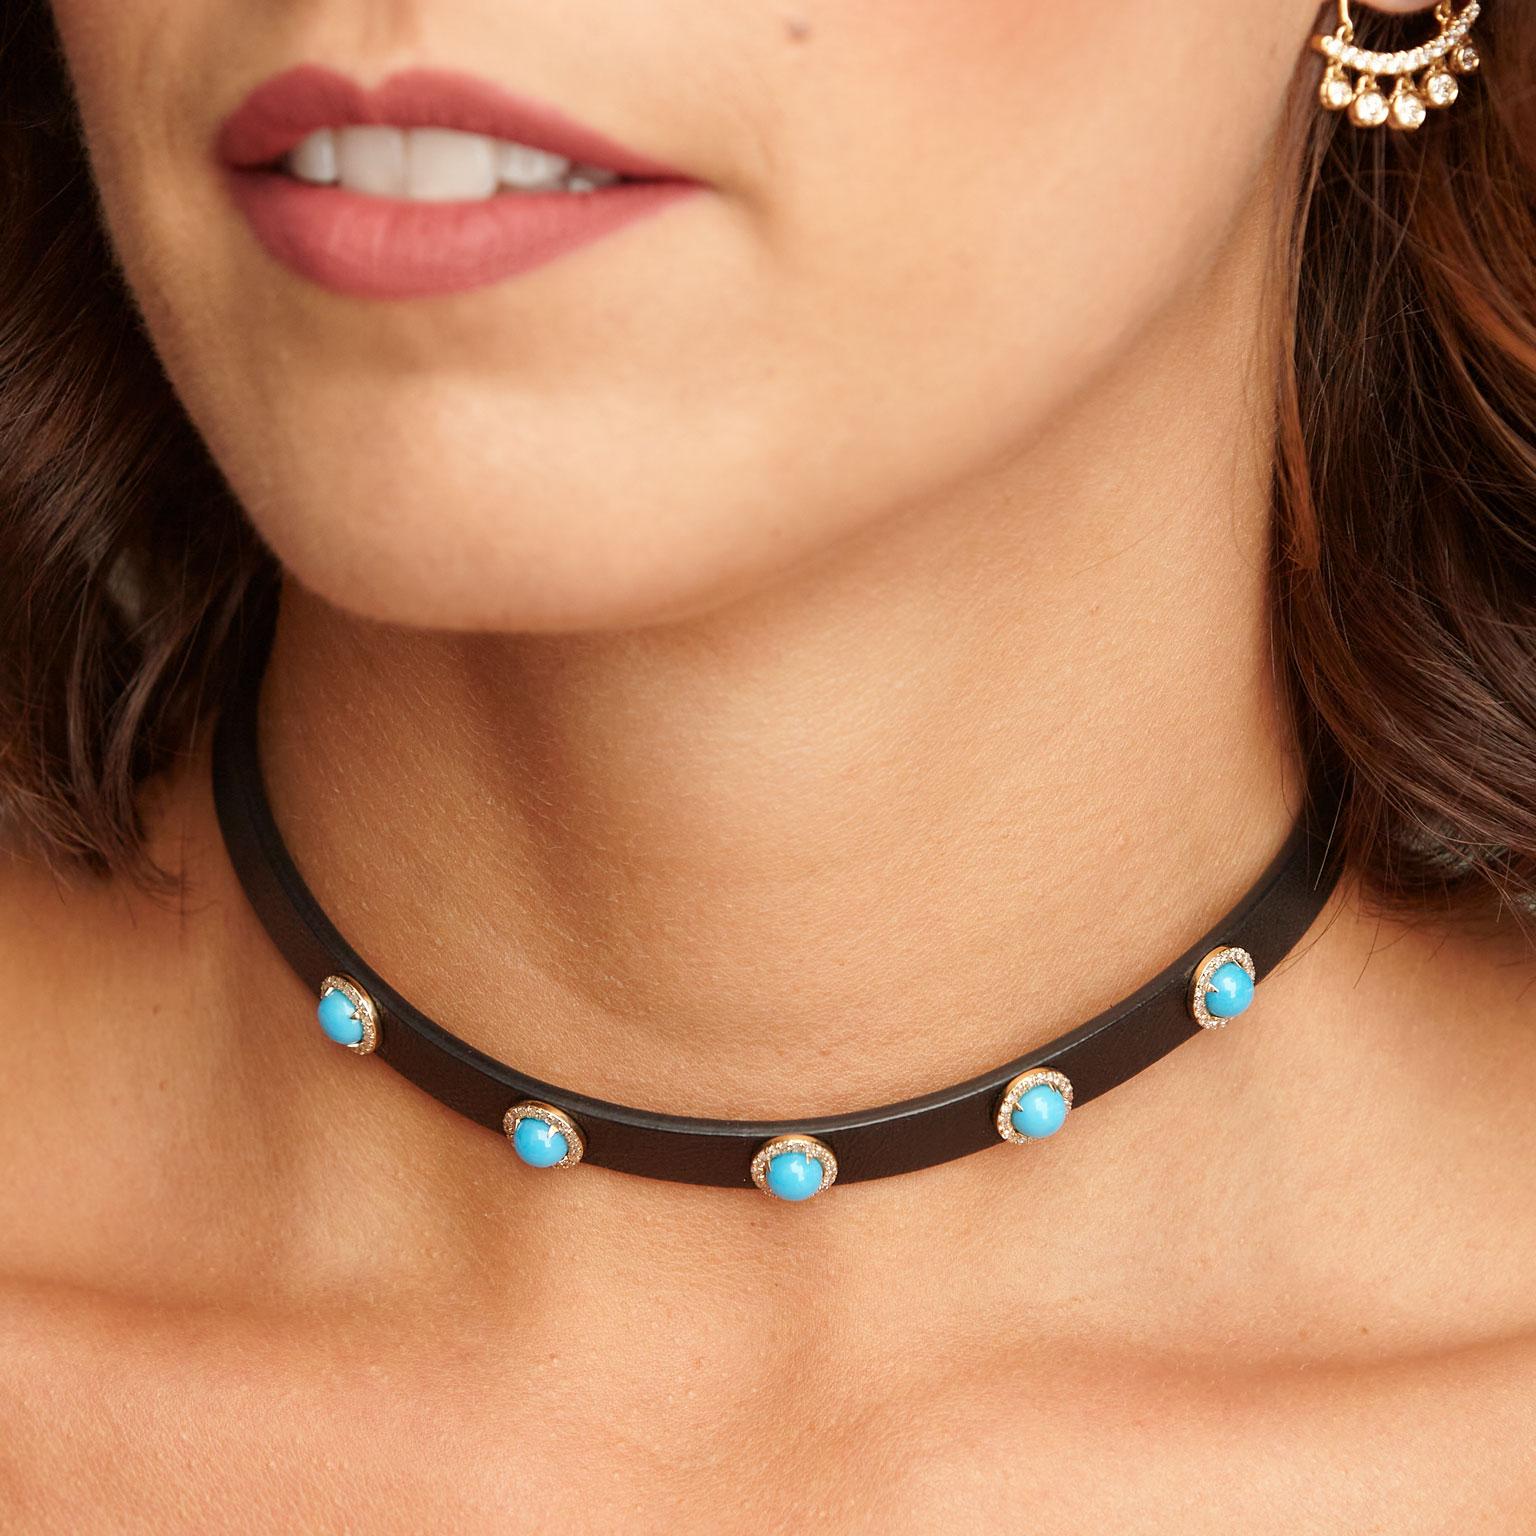 4.31 Carat Turquoise and Diamond Black Leather Choker Necklace

0.16 carat of pave set diamond set in 14 karat yellow gold surround 6 millimeter turquoise cabochon with a total weight of 4.31 carat. 
Affixed to black leather, this choker necklace is